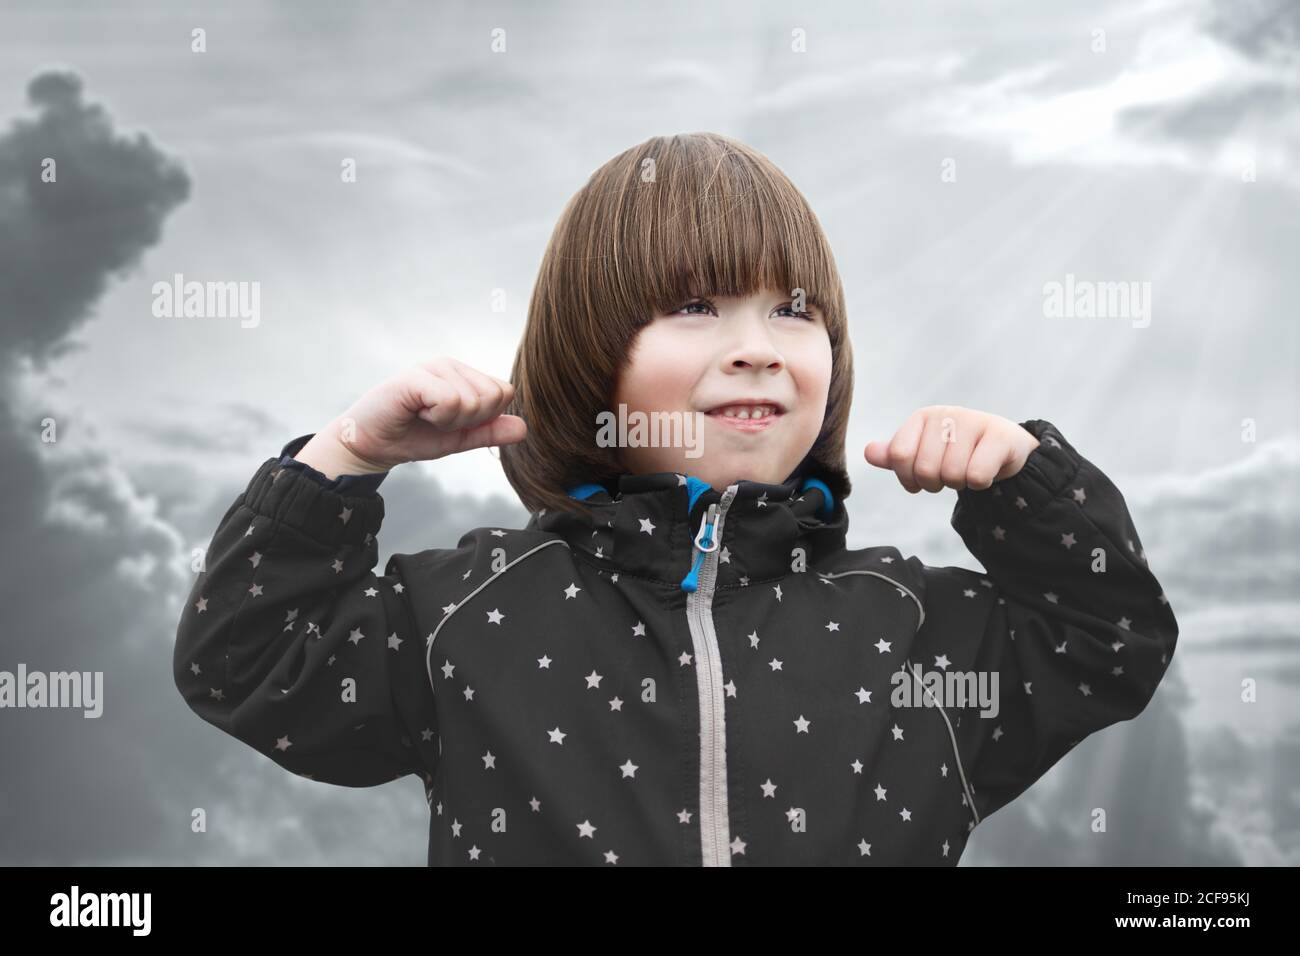 Boy is showing power sign at cloudy background Stock Photo